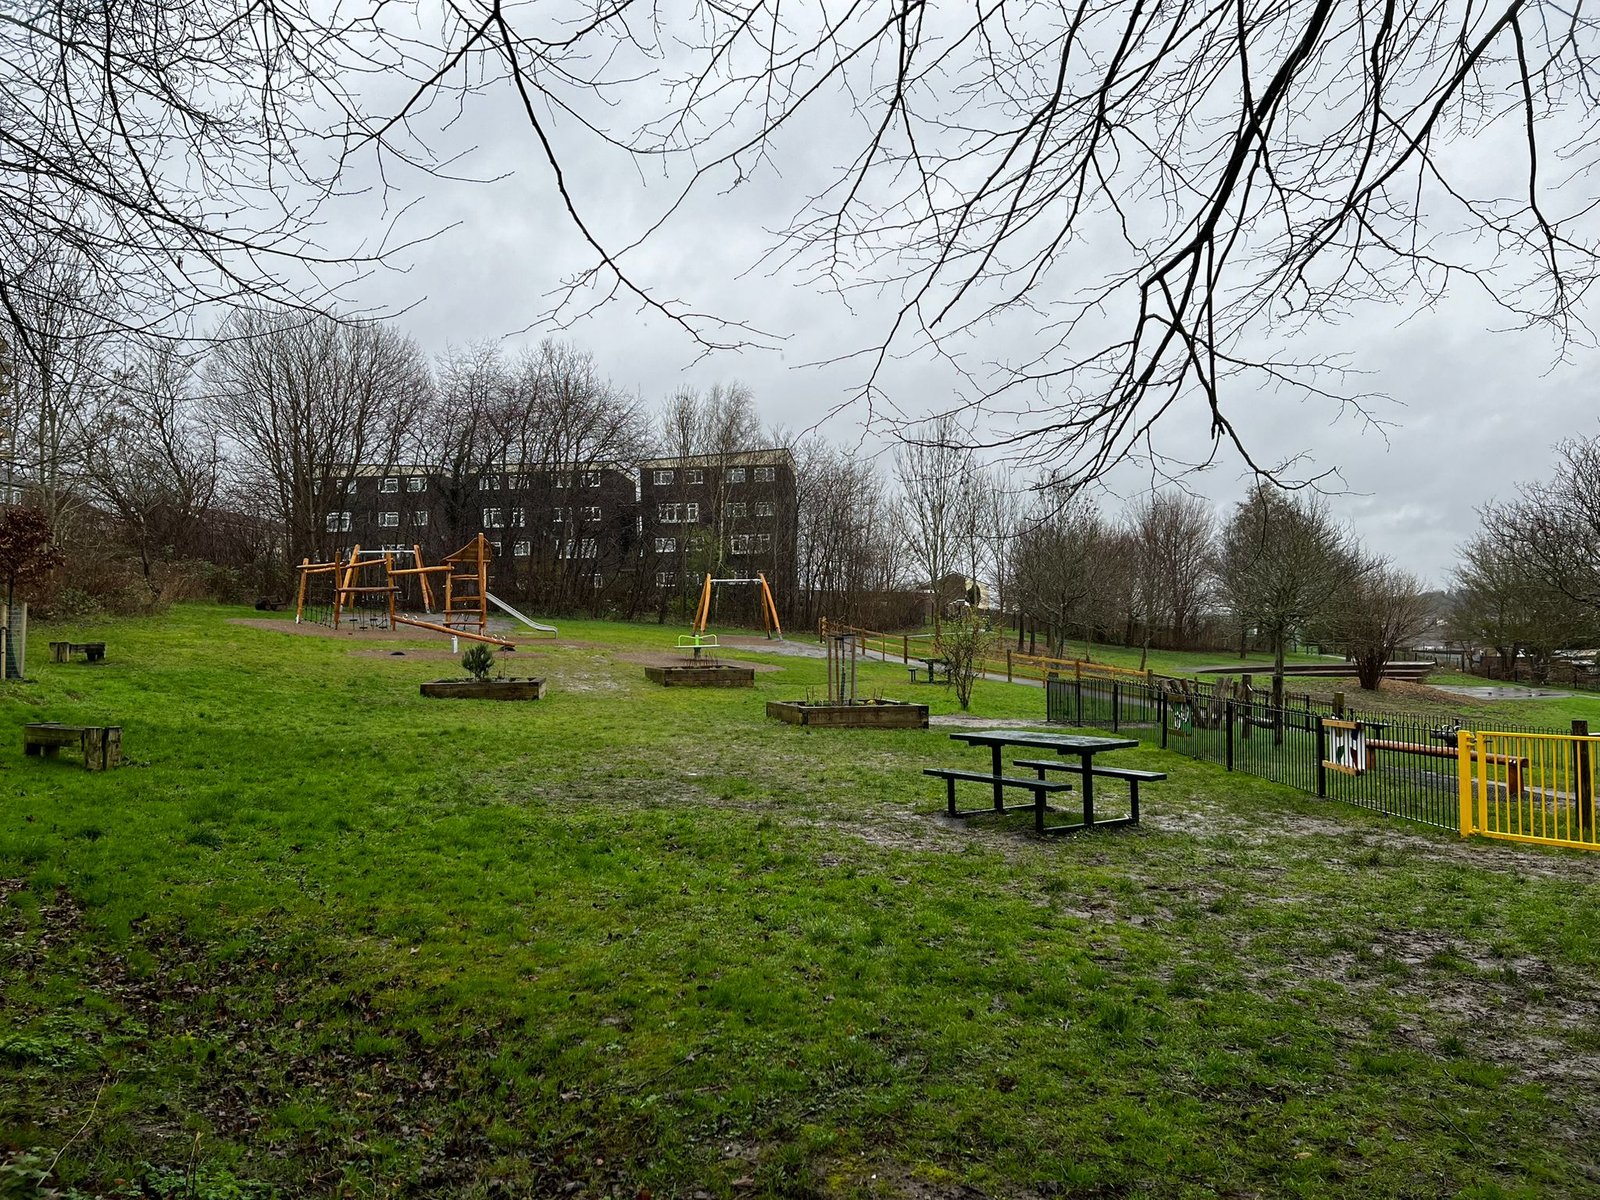 A picture of new play equipment including a see-saw, swing set, roundabout and climbing frame.